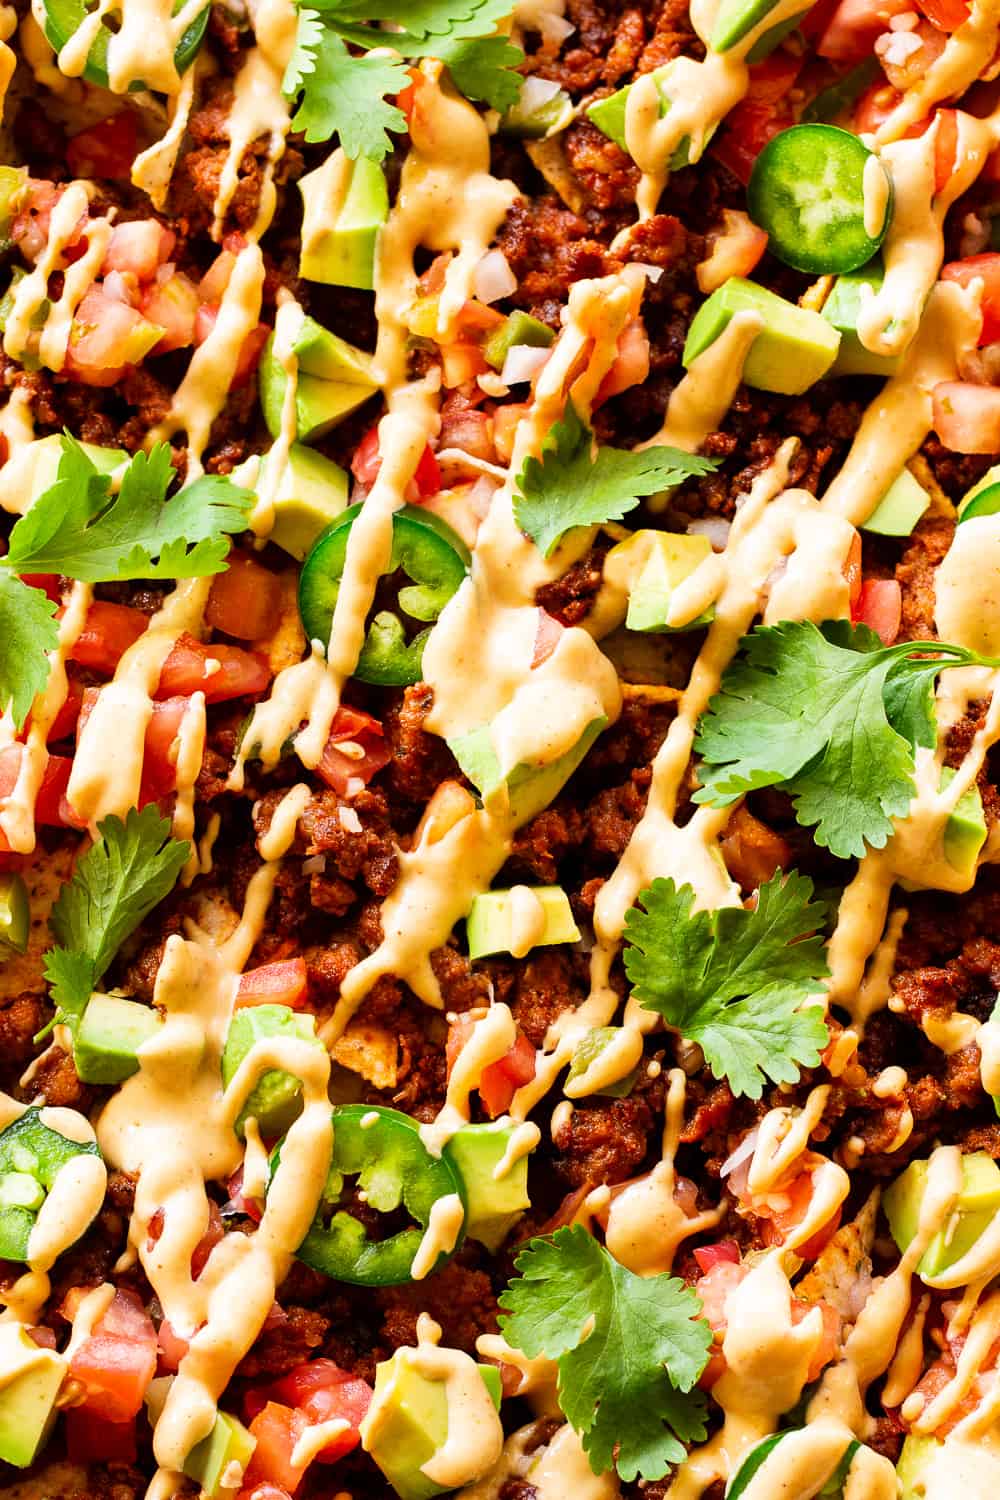 These quick and easy grain free, dairy free paleo nachos don’t sacrifice anything - they’re loaded with chorizo, pico de gallo, avocados and the easiest nacho “cheese” sauce! Great as an appetizer or snack but works well for dinner too! #paleo #cleaneating #dairyfree